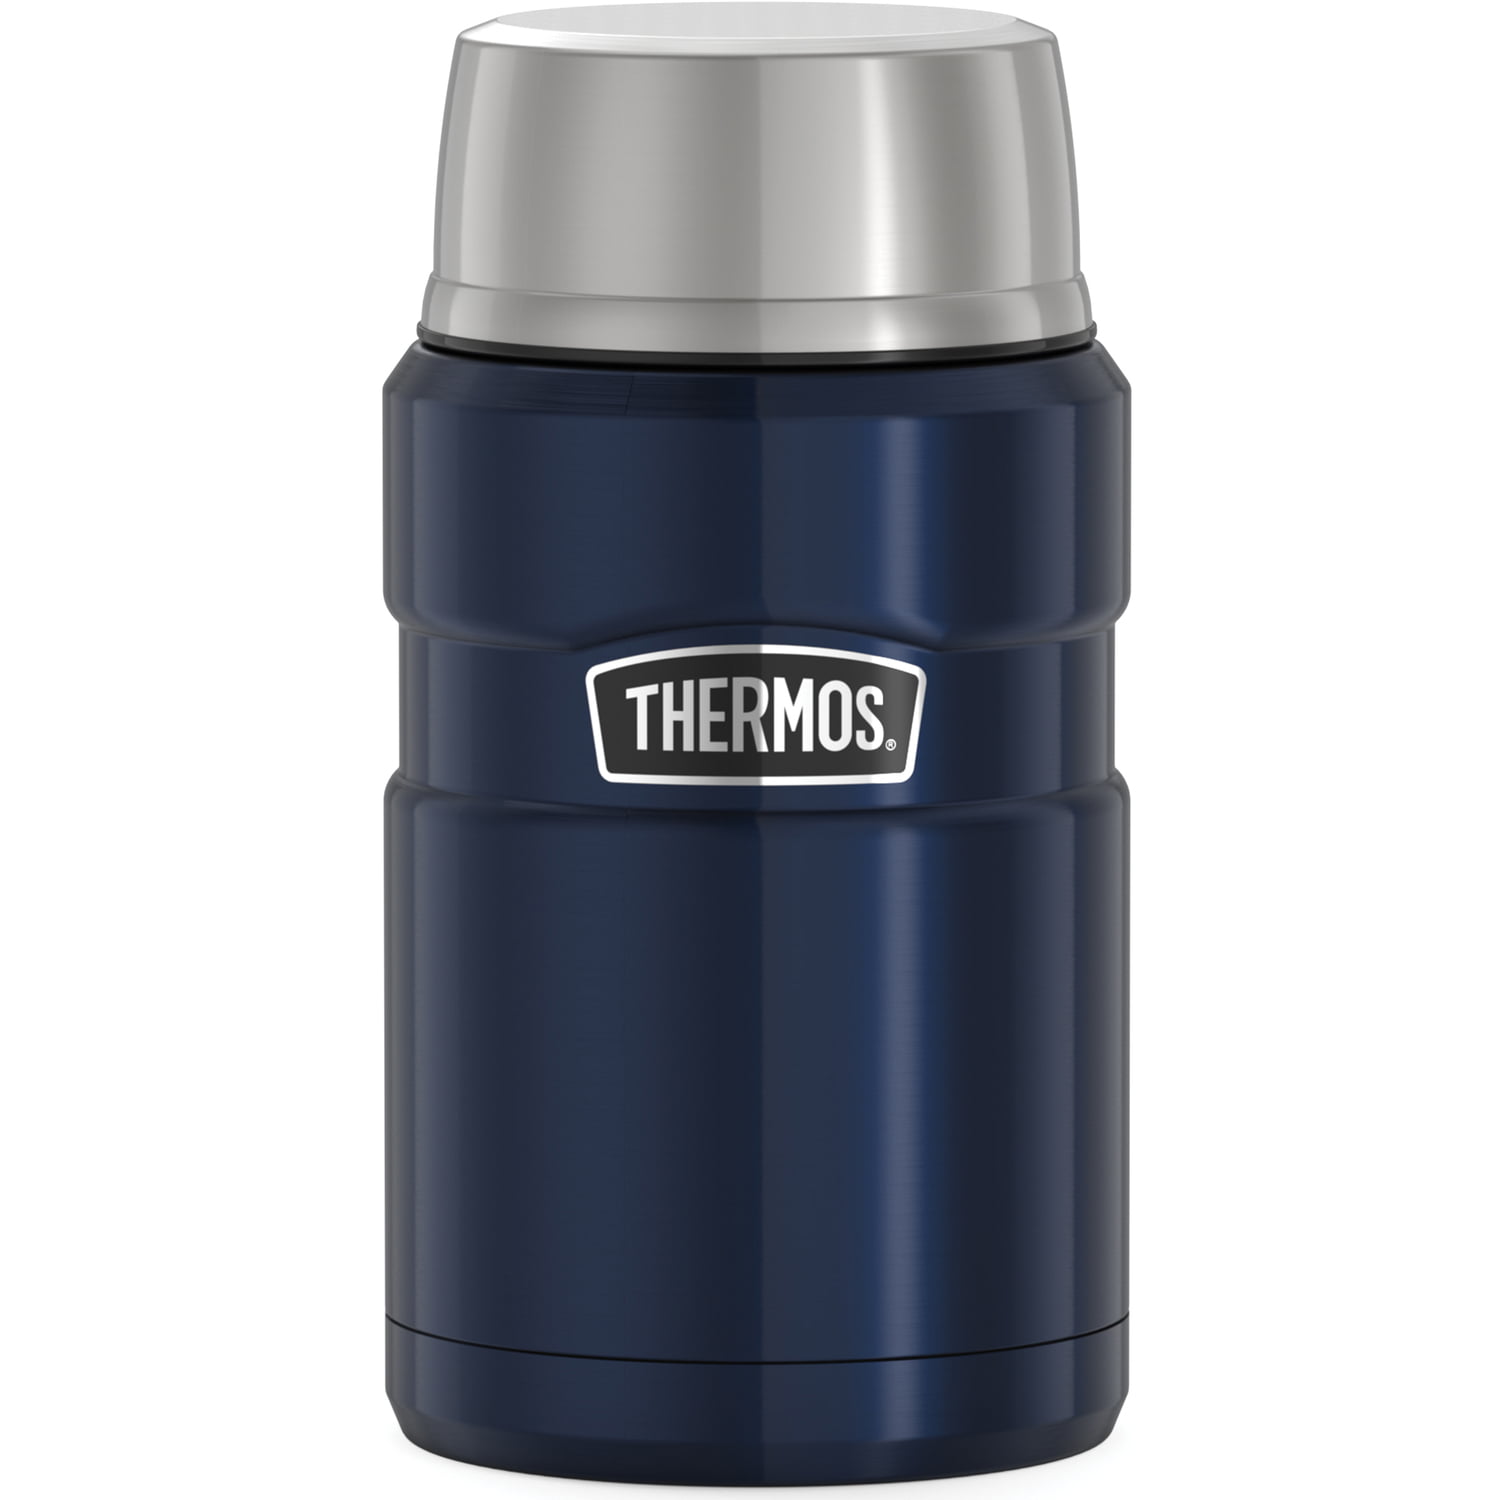 NEW Thermos Stainless Steel King 16-Ounce Leak-Proof Travel Mug Midnight Blue 